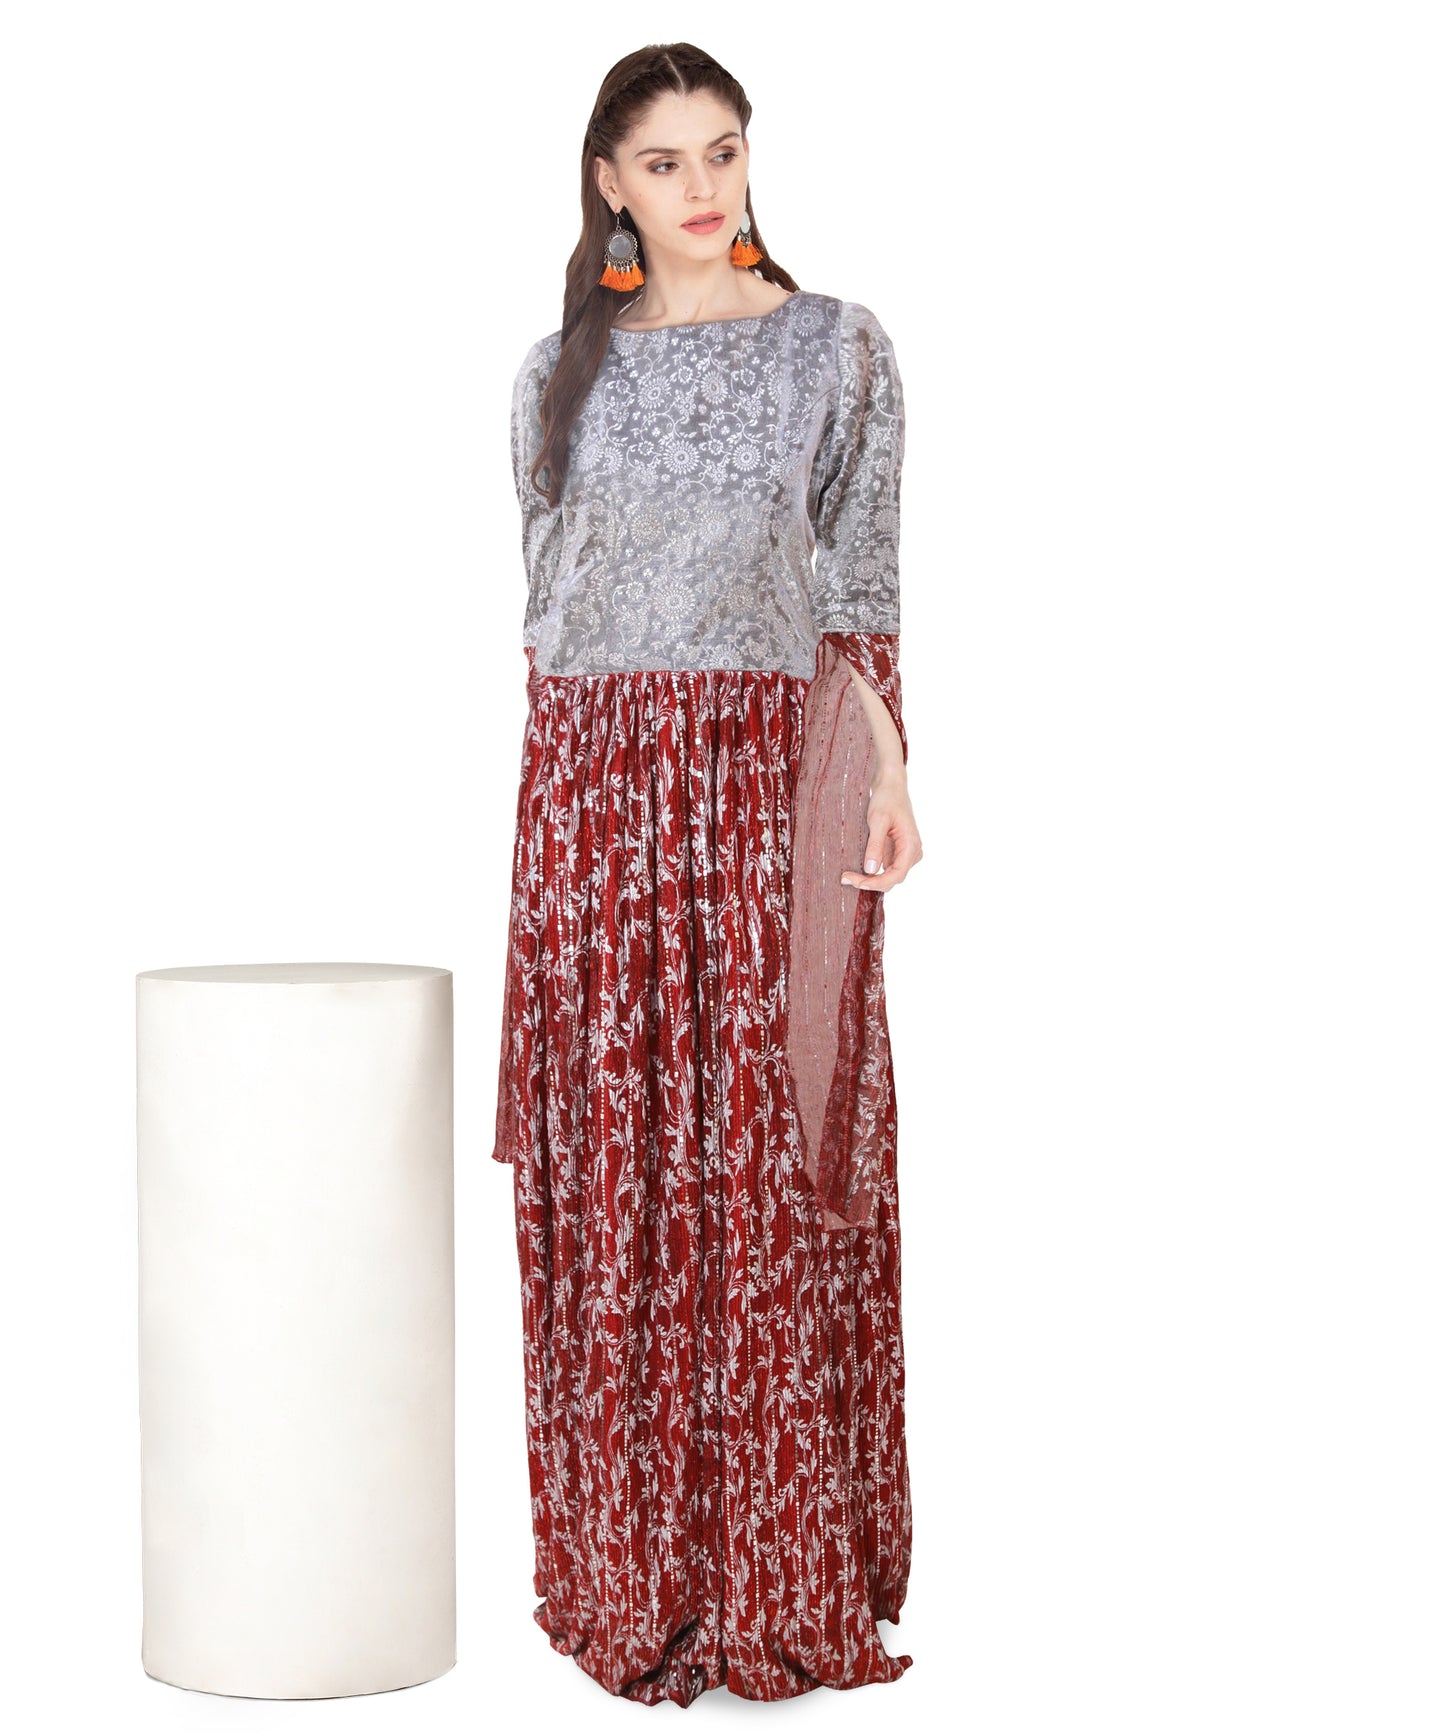 Maroon sequin embellished maxi dress | S3W163